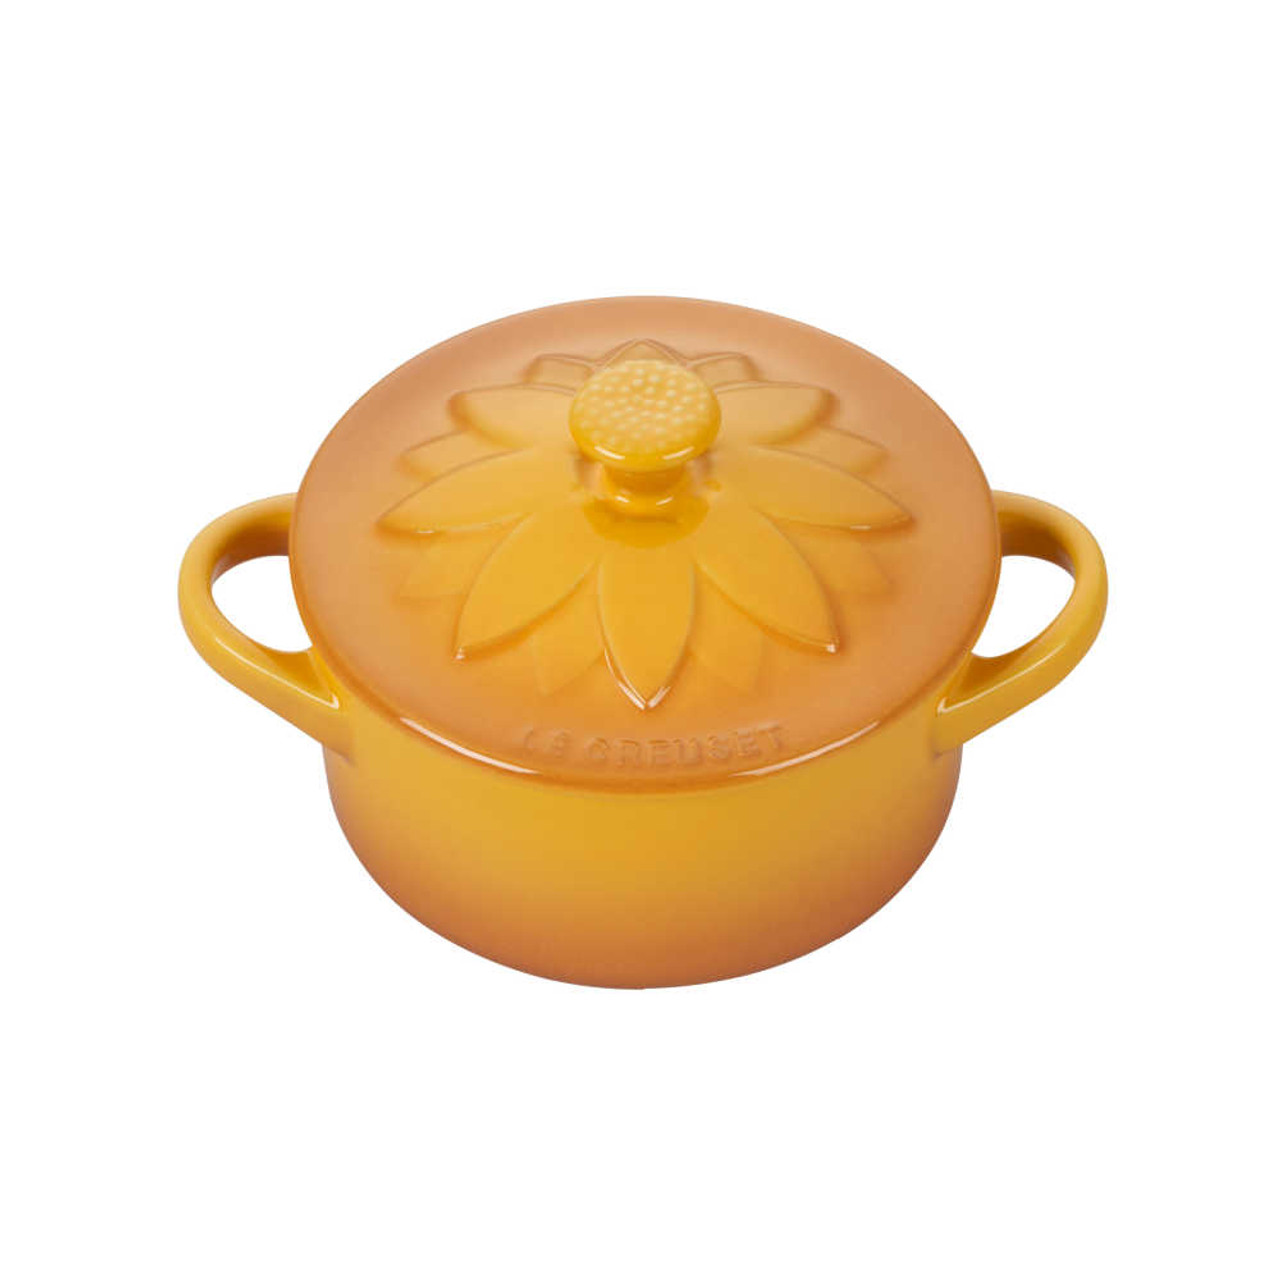 Le Creuset Mini Cocotte With Flower Lid in Nectar